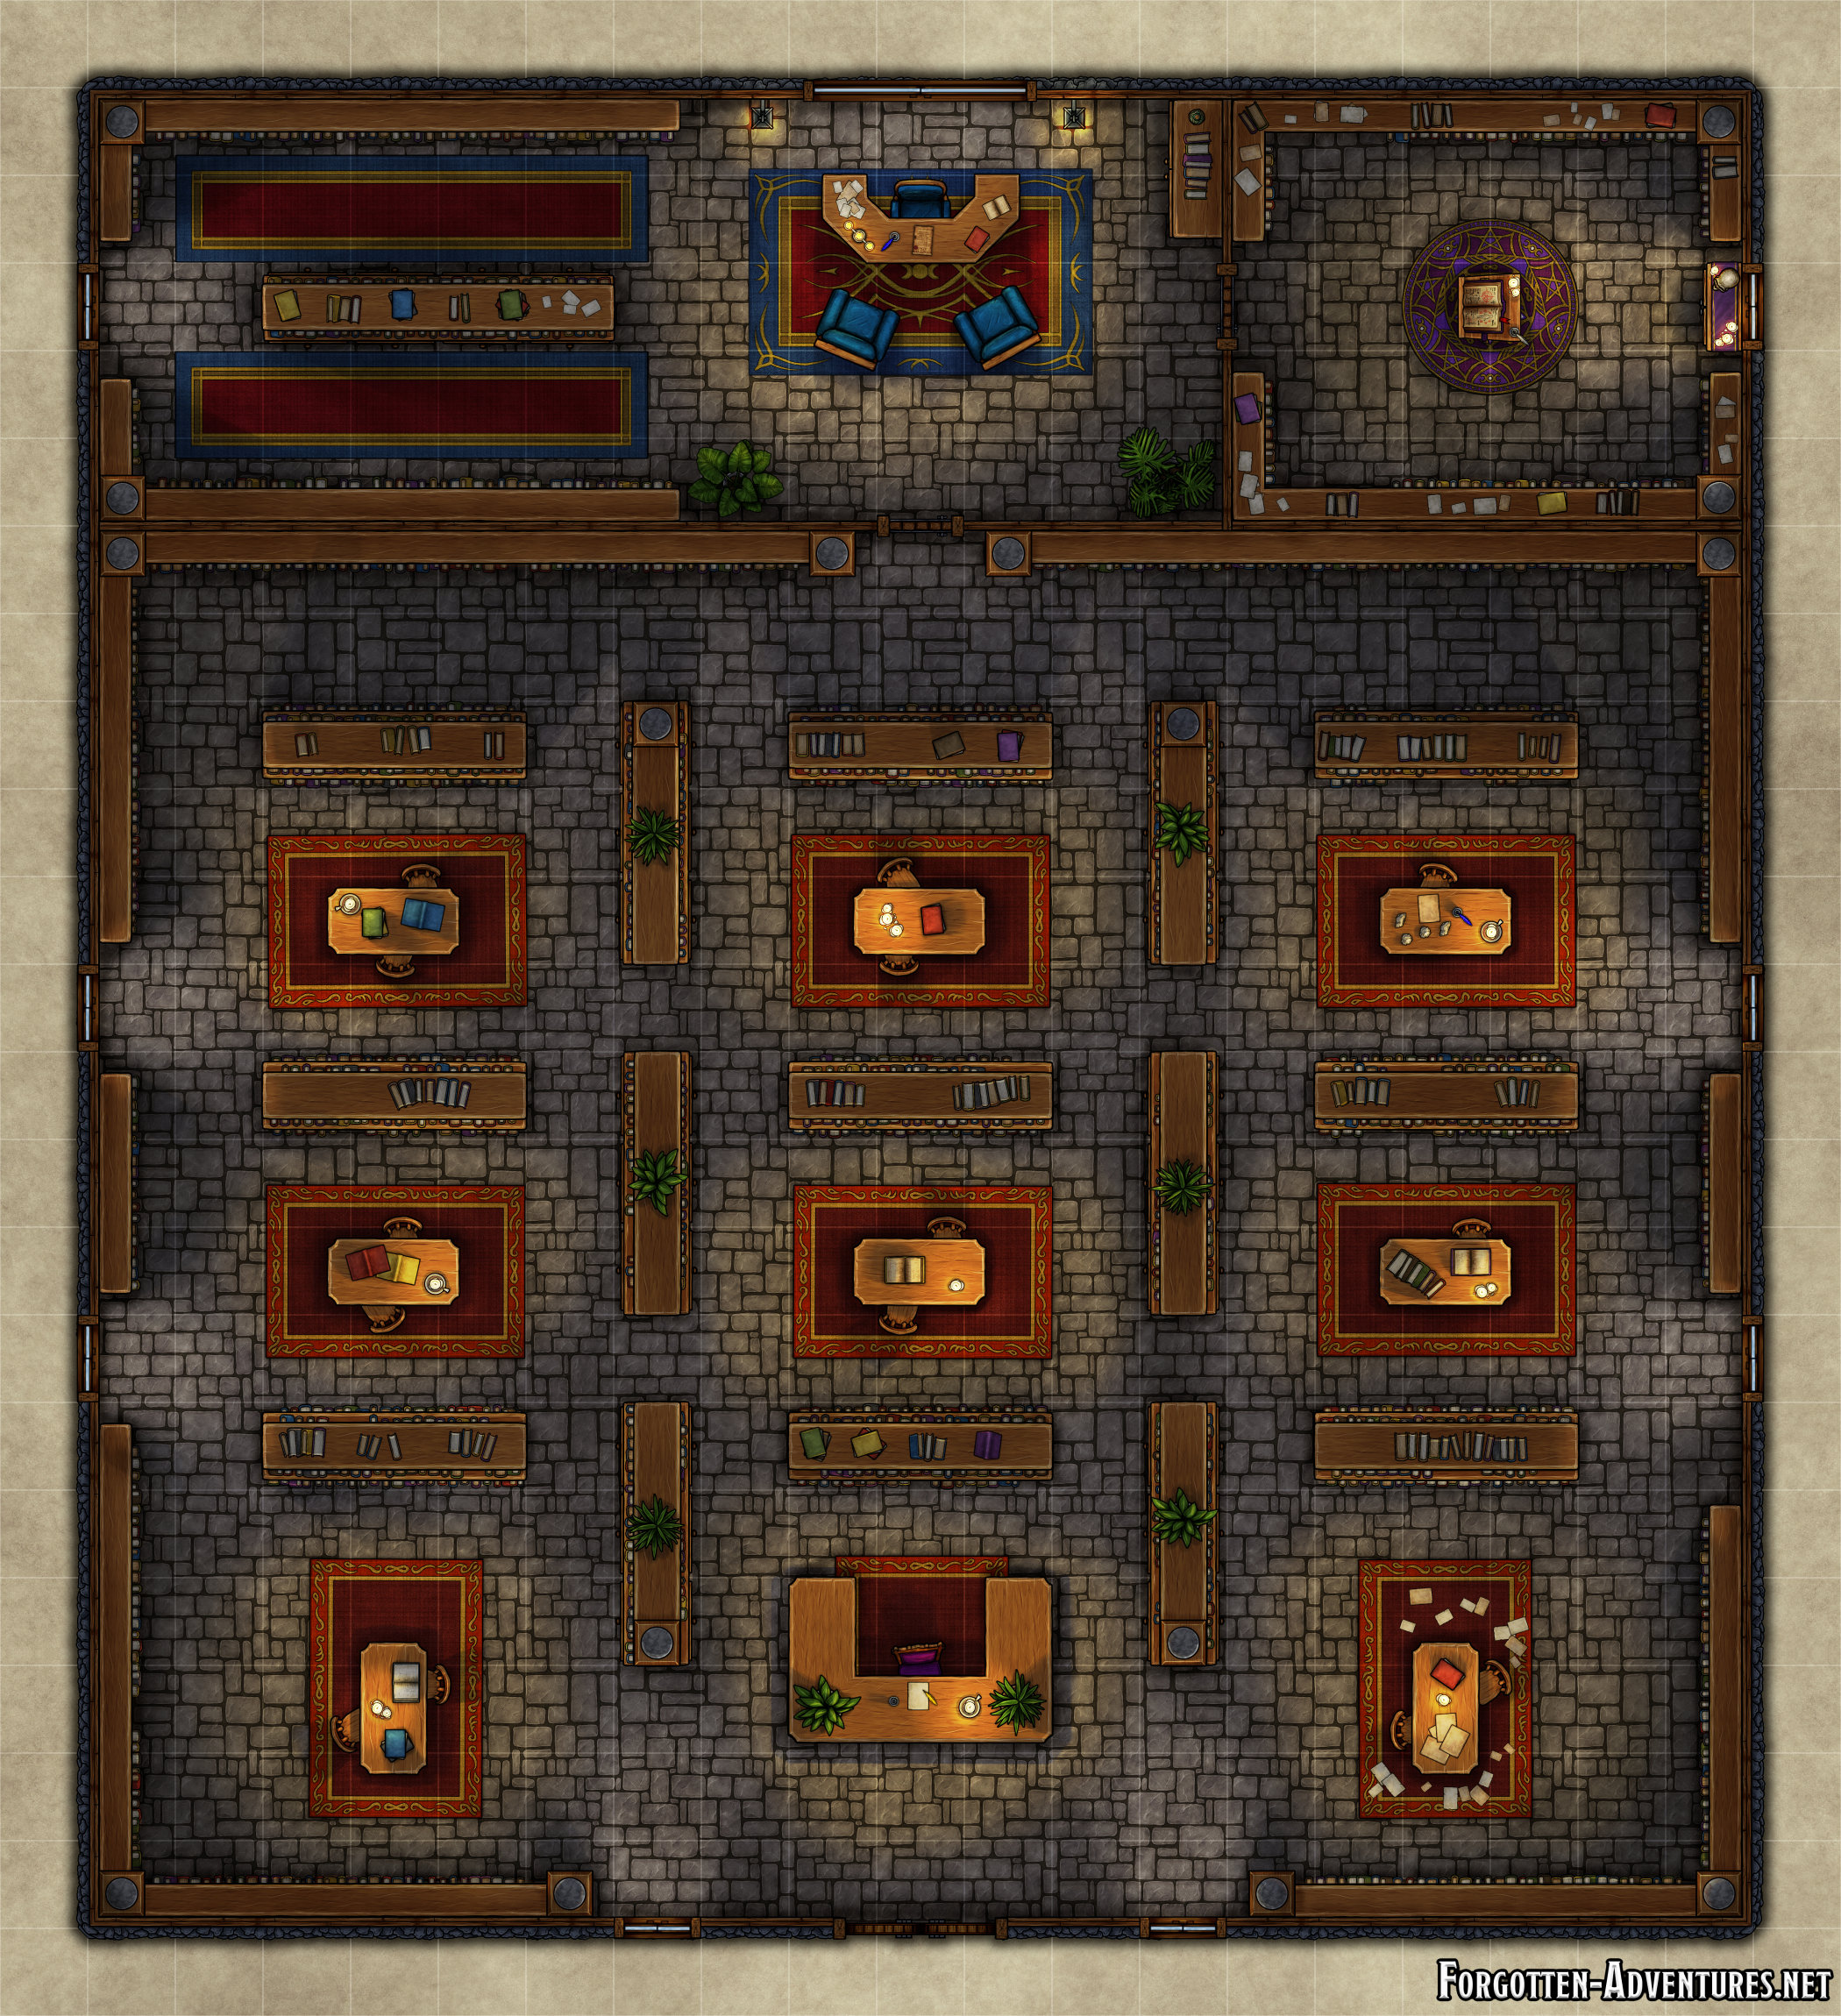 Maps library. Библиотека ДНД. Библиотека DND Map. Библиотека ДНД арт. D&D Library Battle Map.